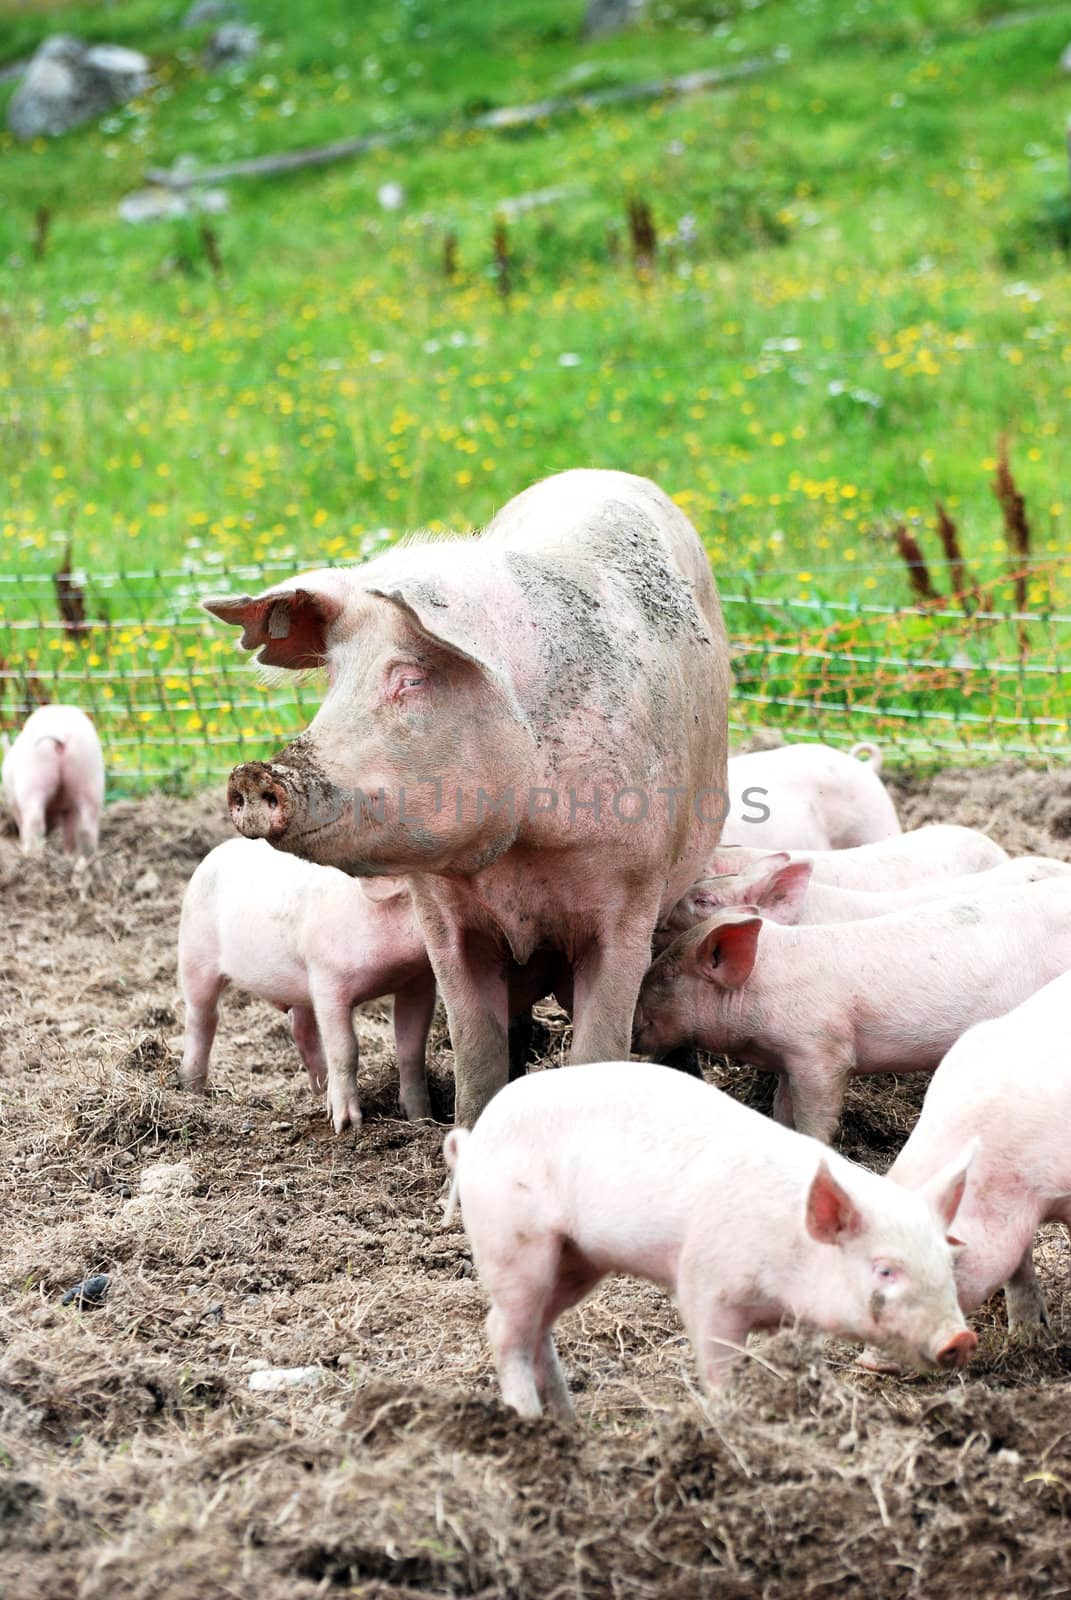 A sow with her piglets